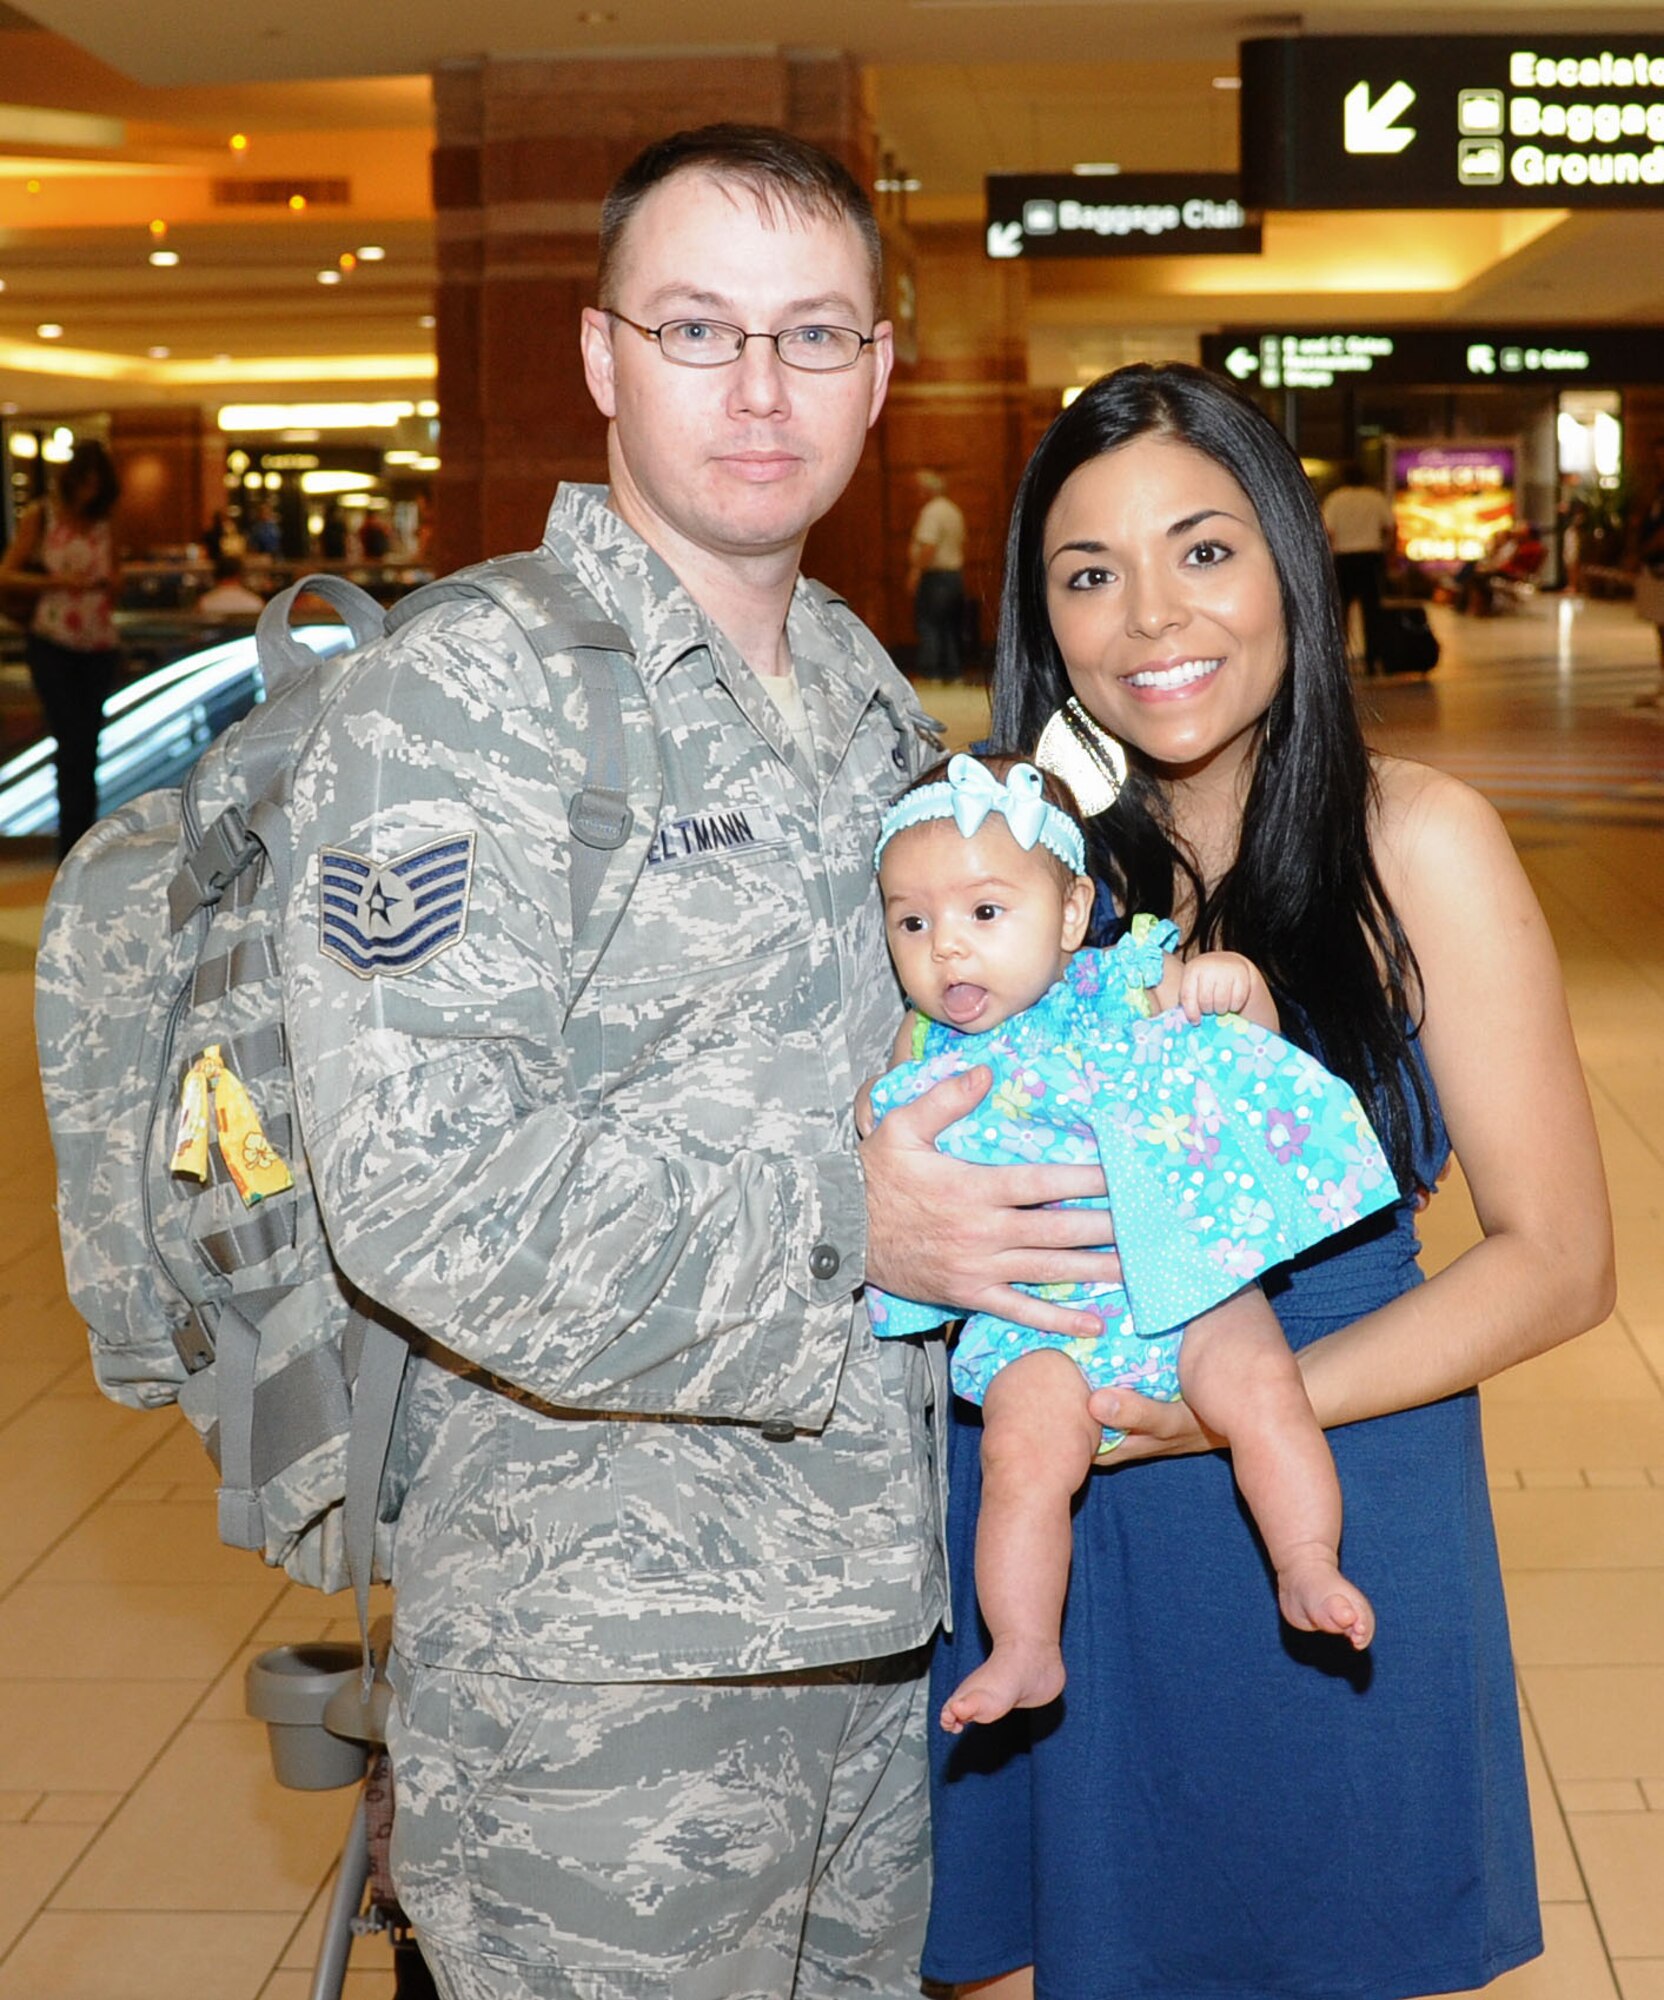 Tech. Sgt. Christopher Seltmann, 56th Fighter Wing weapons safety, and Staff Sgt. Darlene Seltmann, 56th Fighter Wing Public Affairs, pose for a photo with their 3-month old daughter, Brooklyn, Aug. 3 at Phoenix Sky Harbor International Airport after he returned from a six-month deployment to Southwest Asia. (U.S. Air Force photo by Senior Airman Sandra Welch) 